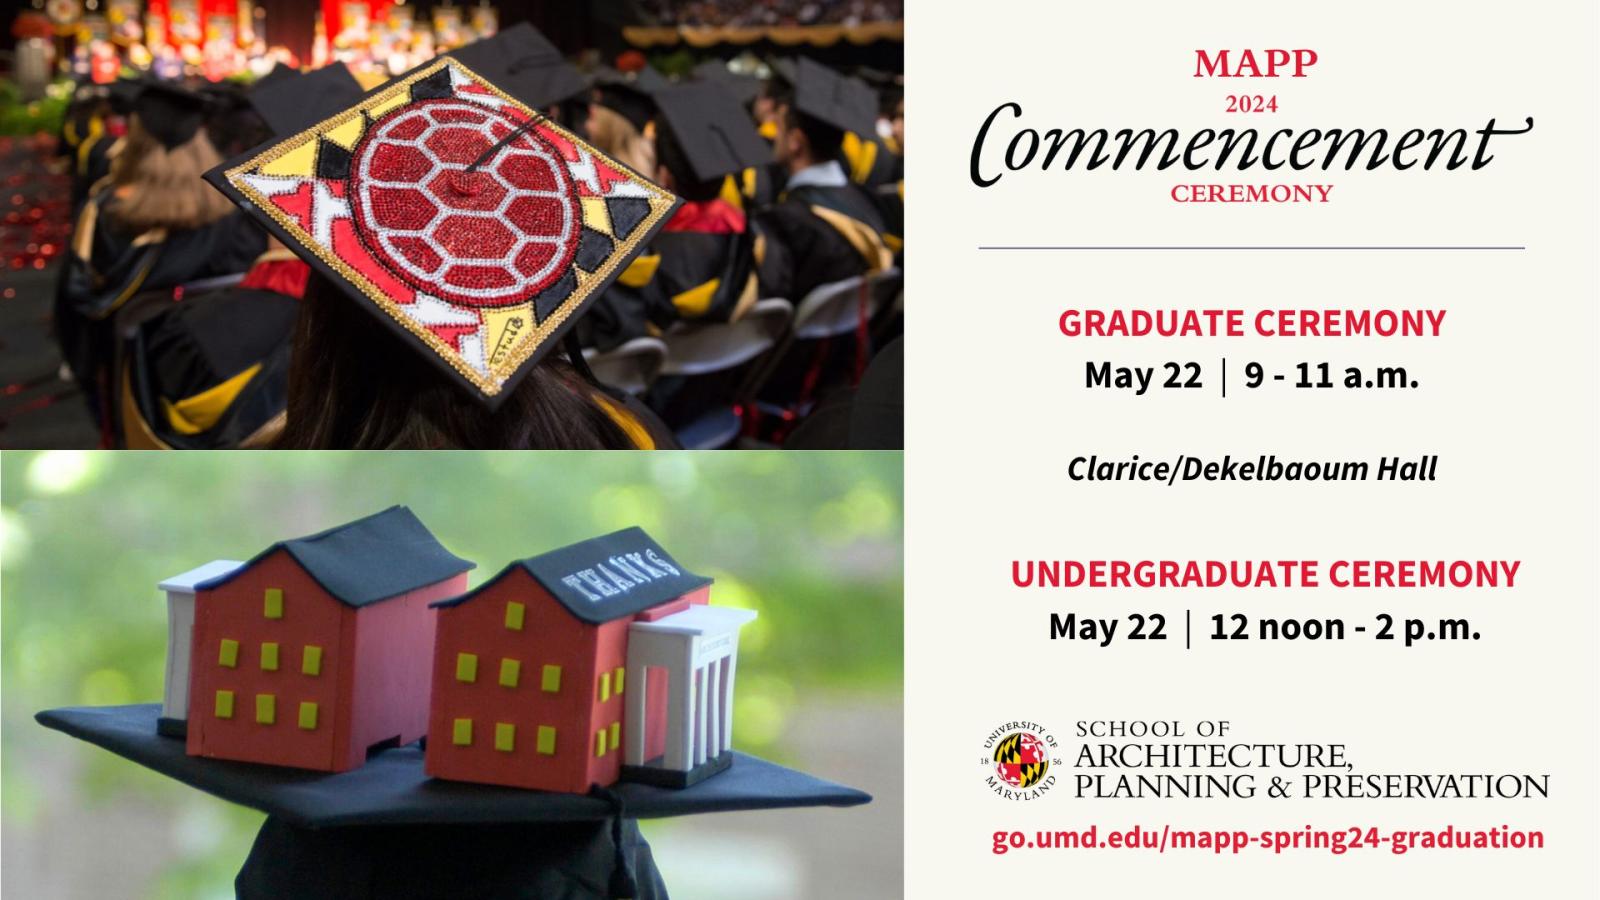 Graduation caps with architecture buildings and the Testudo Turtle. Text details on the MAPP Commencement Ceremony Spring 2024